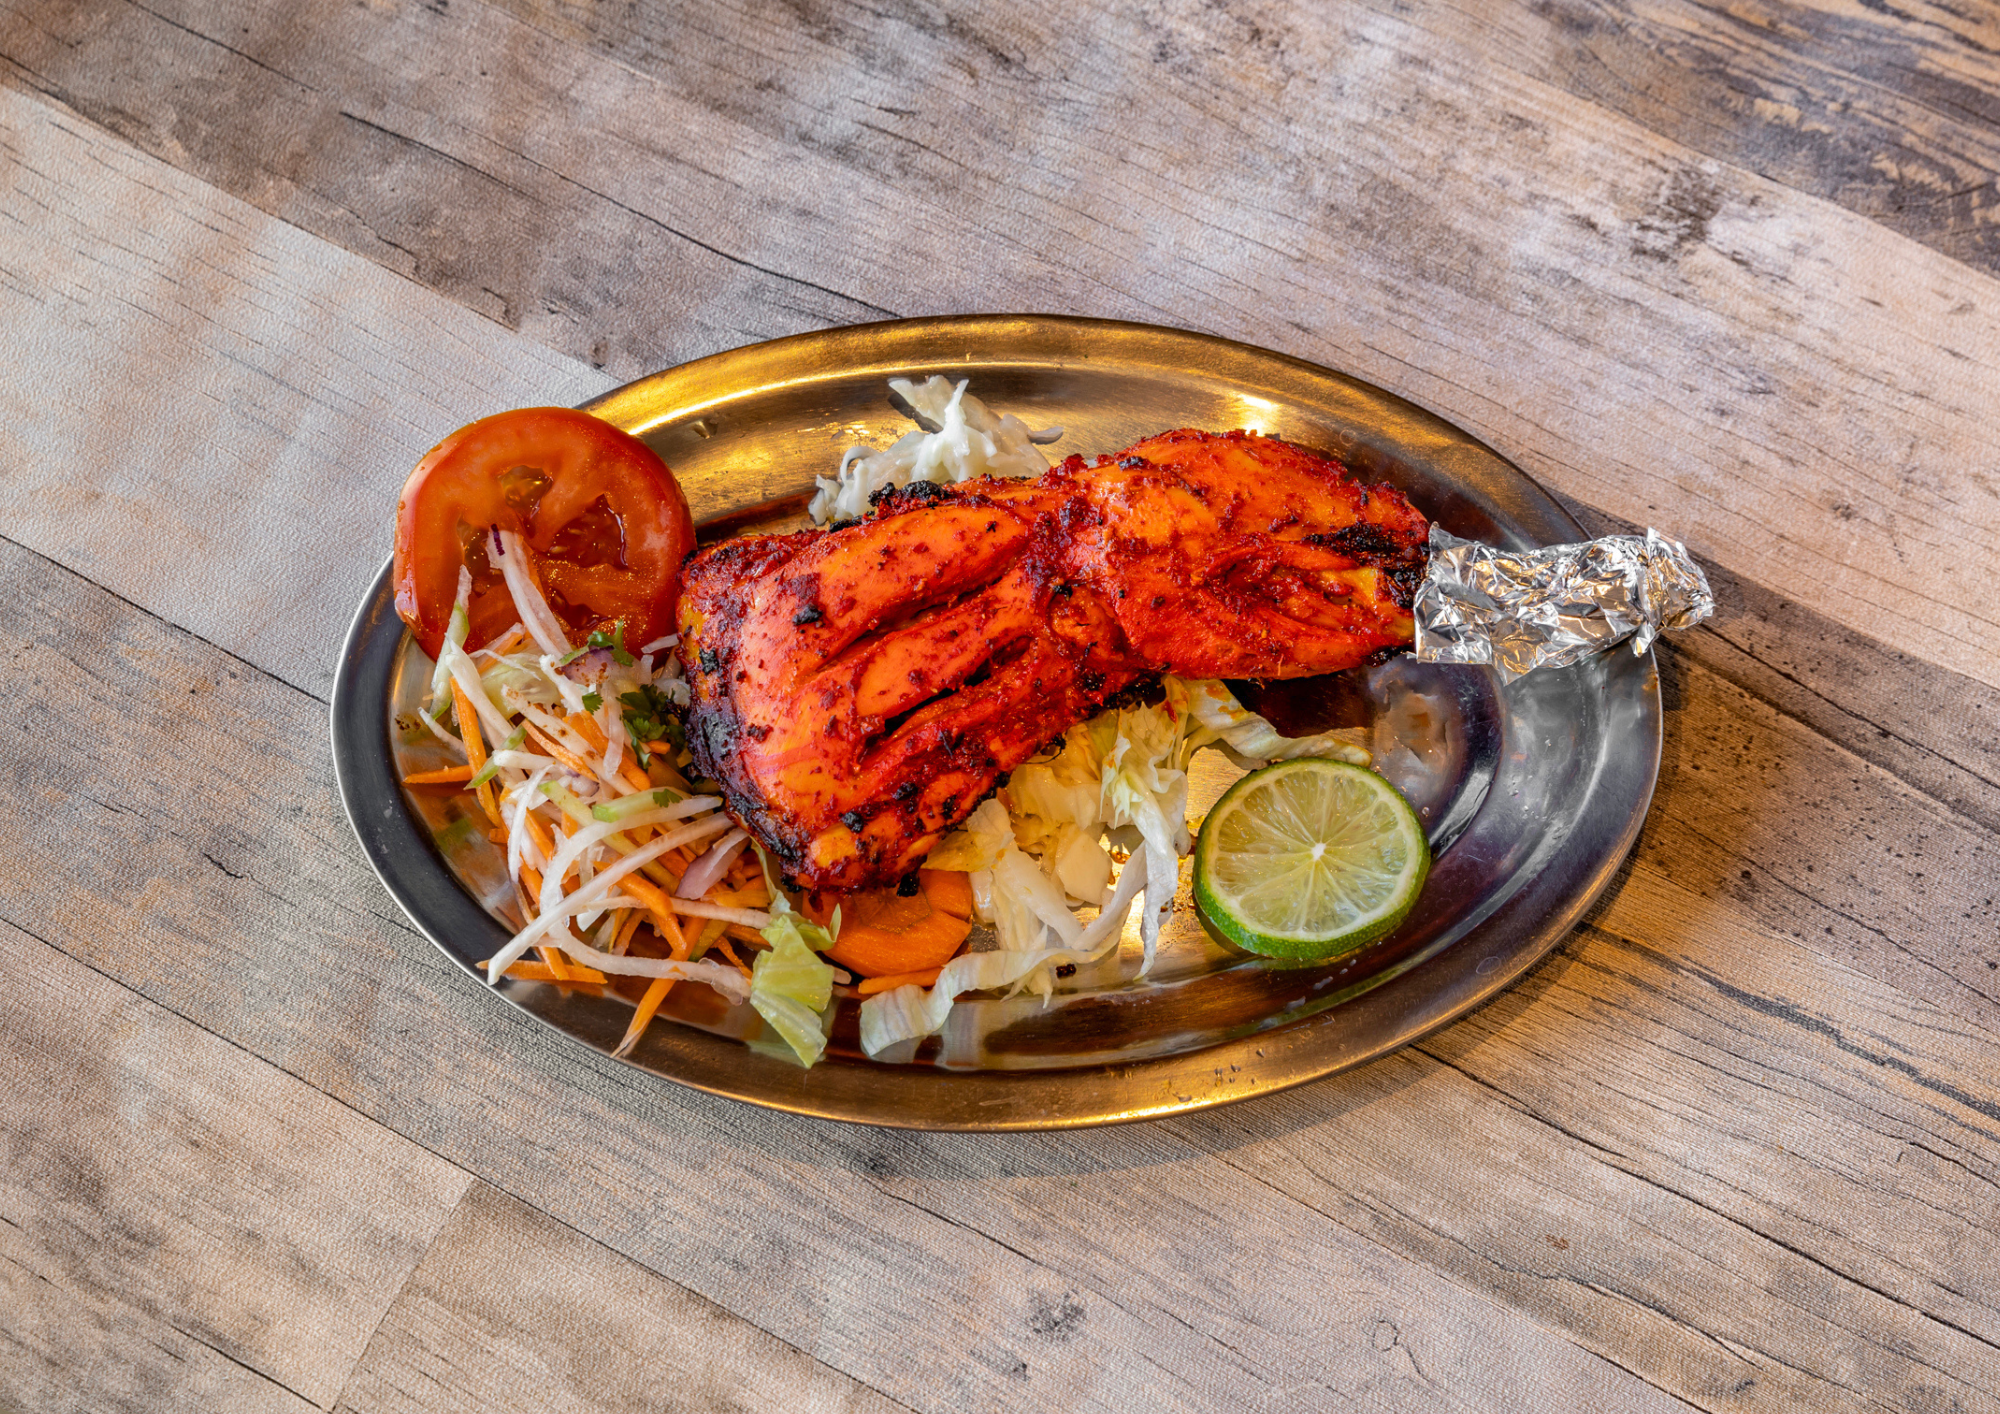 Poulet tandoori by Maison Indian Food